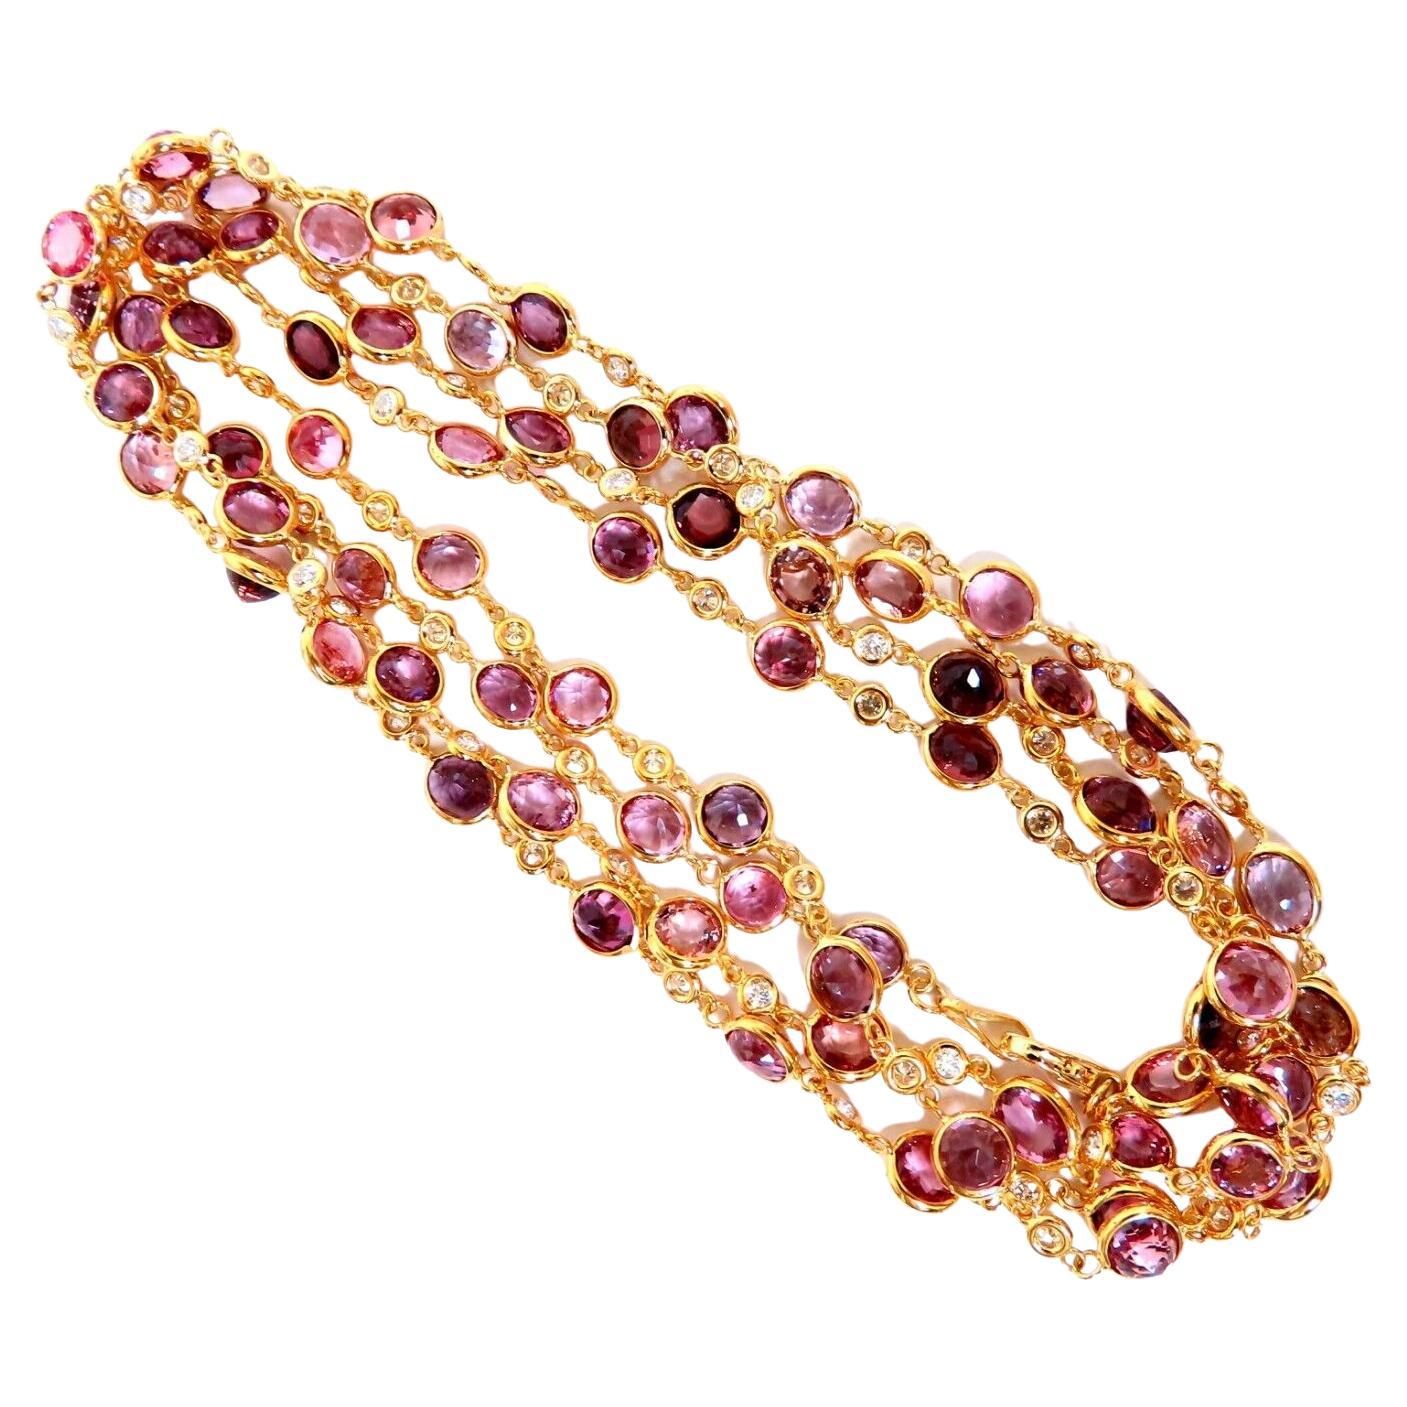 46ct Natural Pink Spinel Diamonds Yard Necklace 14kt Gold For Sale